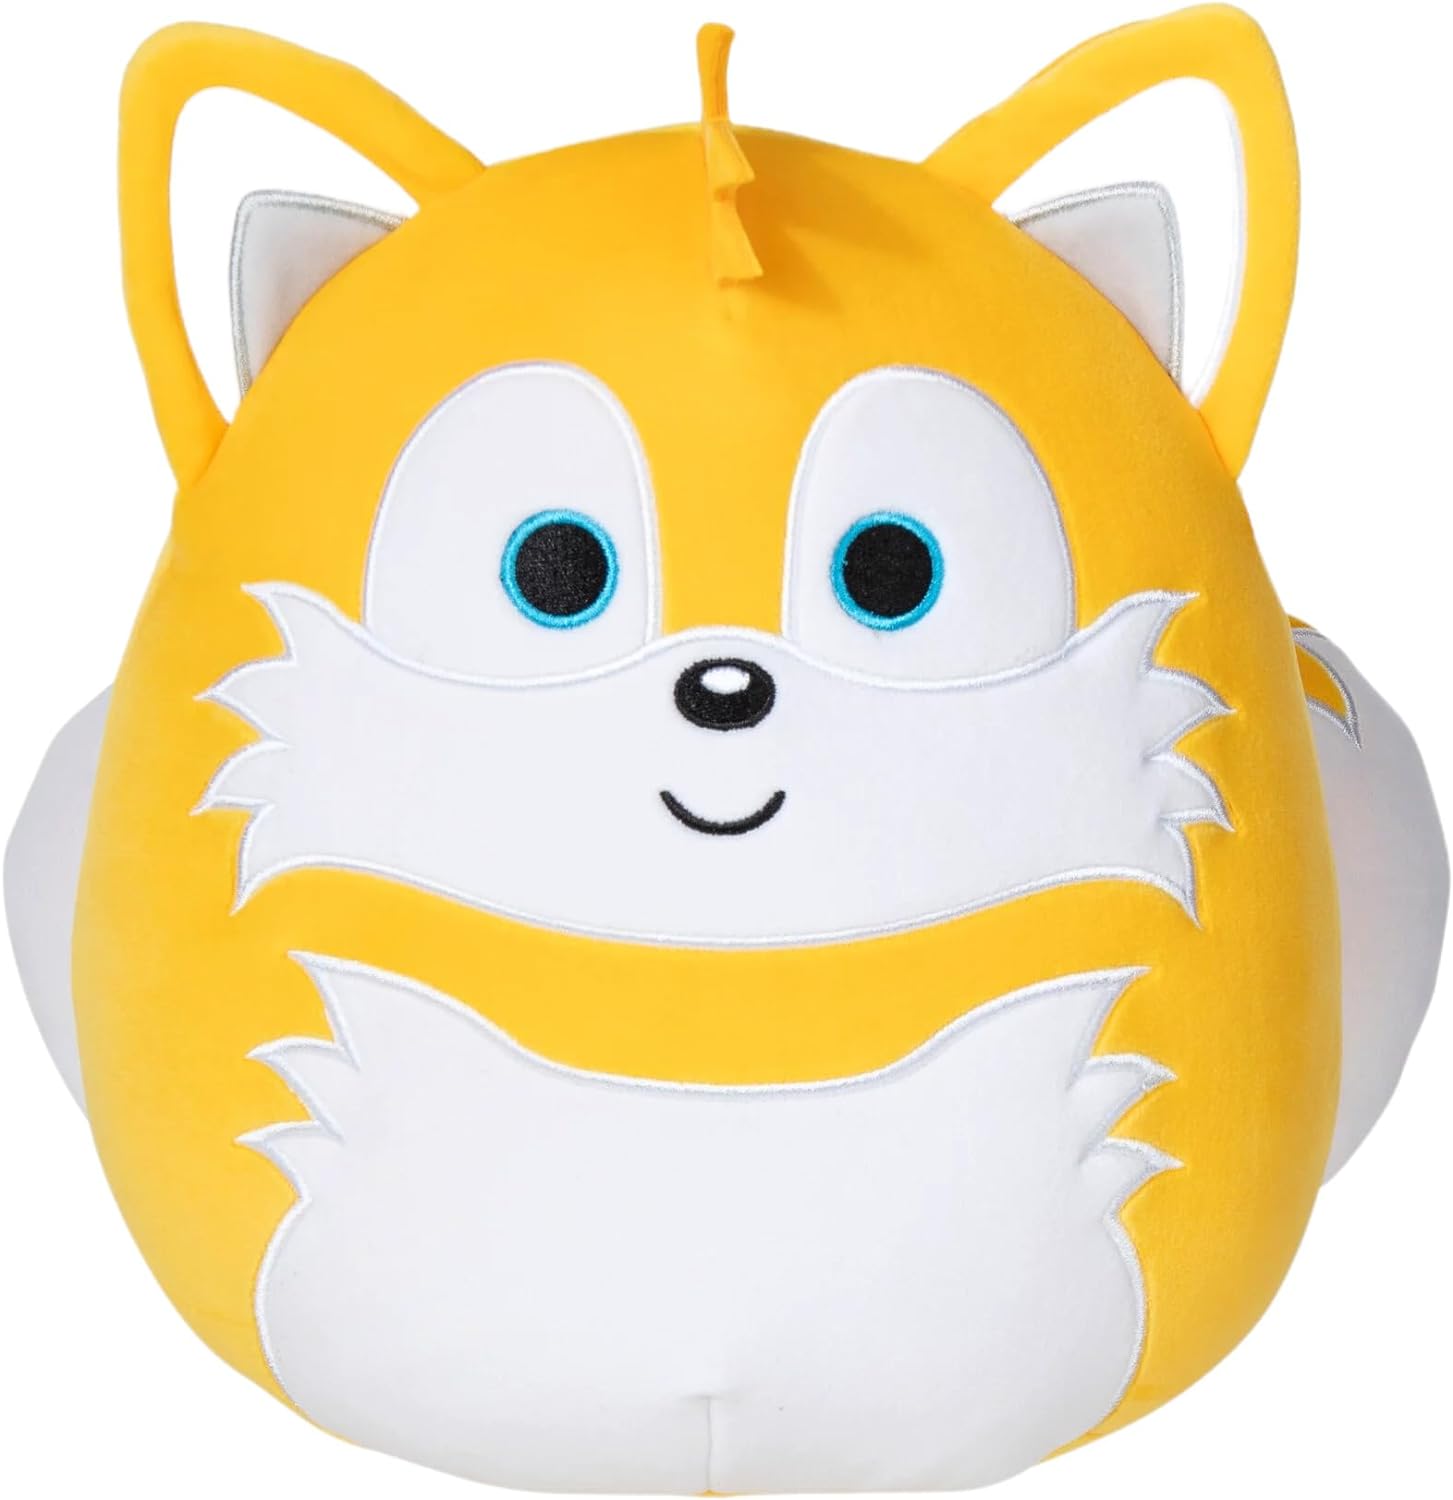 Squishmallows Sonic The Hedgehog 10-Inch - Medium-Sized Official KellyToy (Tails)